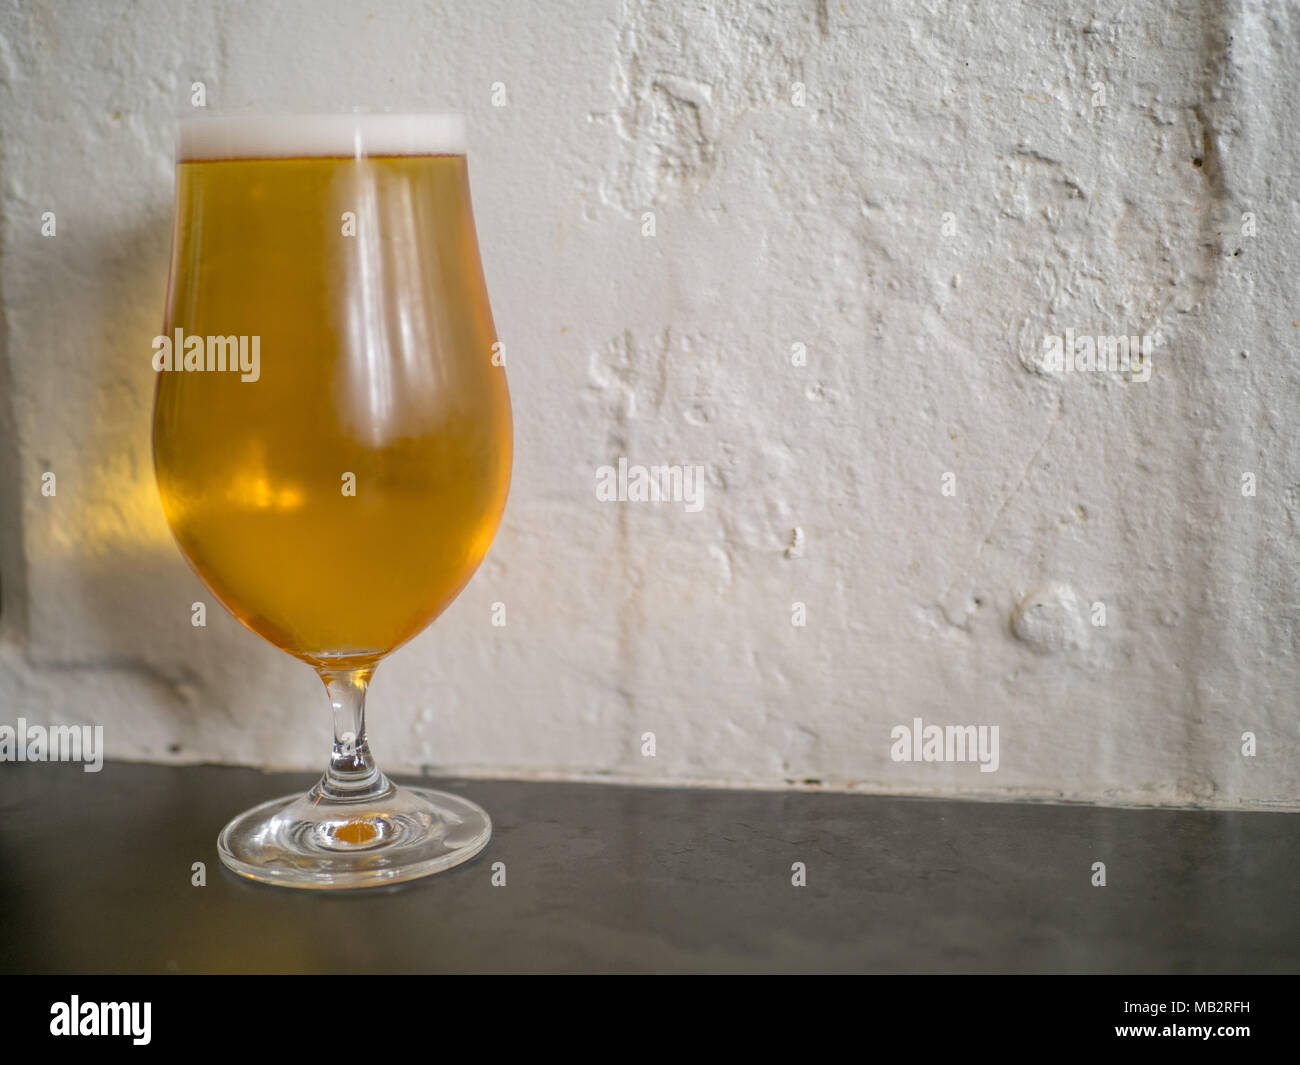 Closeup of tulip glass filled with Belgian beer on a bar counter top. Stock Photo